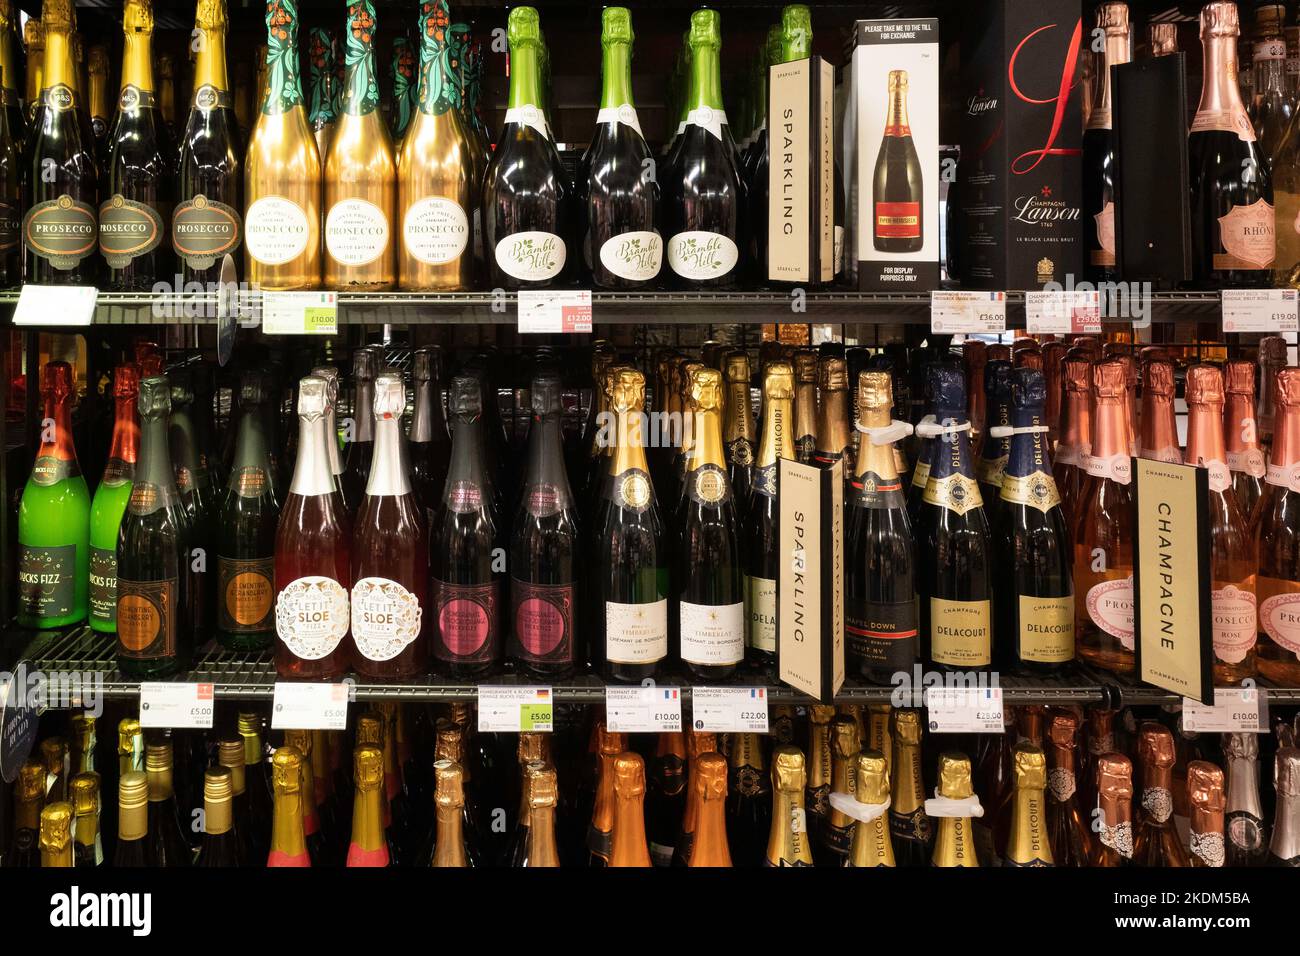 A  display of assorted sparkling wine bottles in advance of Christmas trade in a supermarket in Middlesbrough England Uk Stock Photo